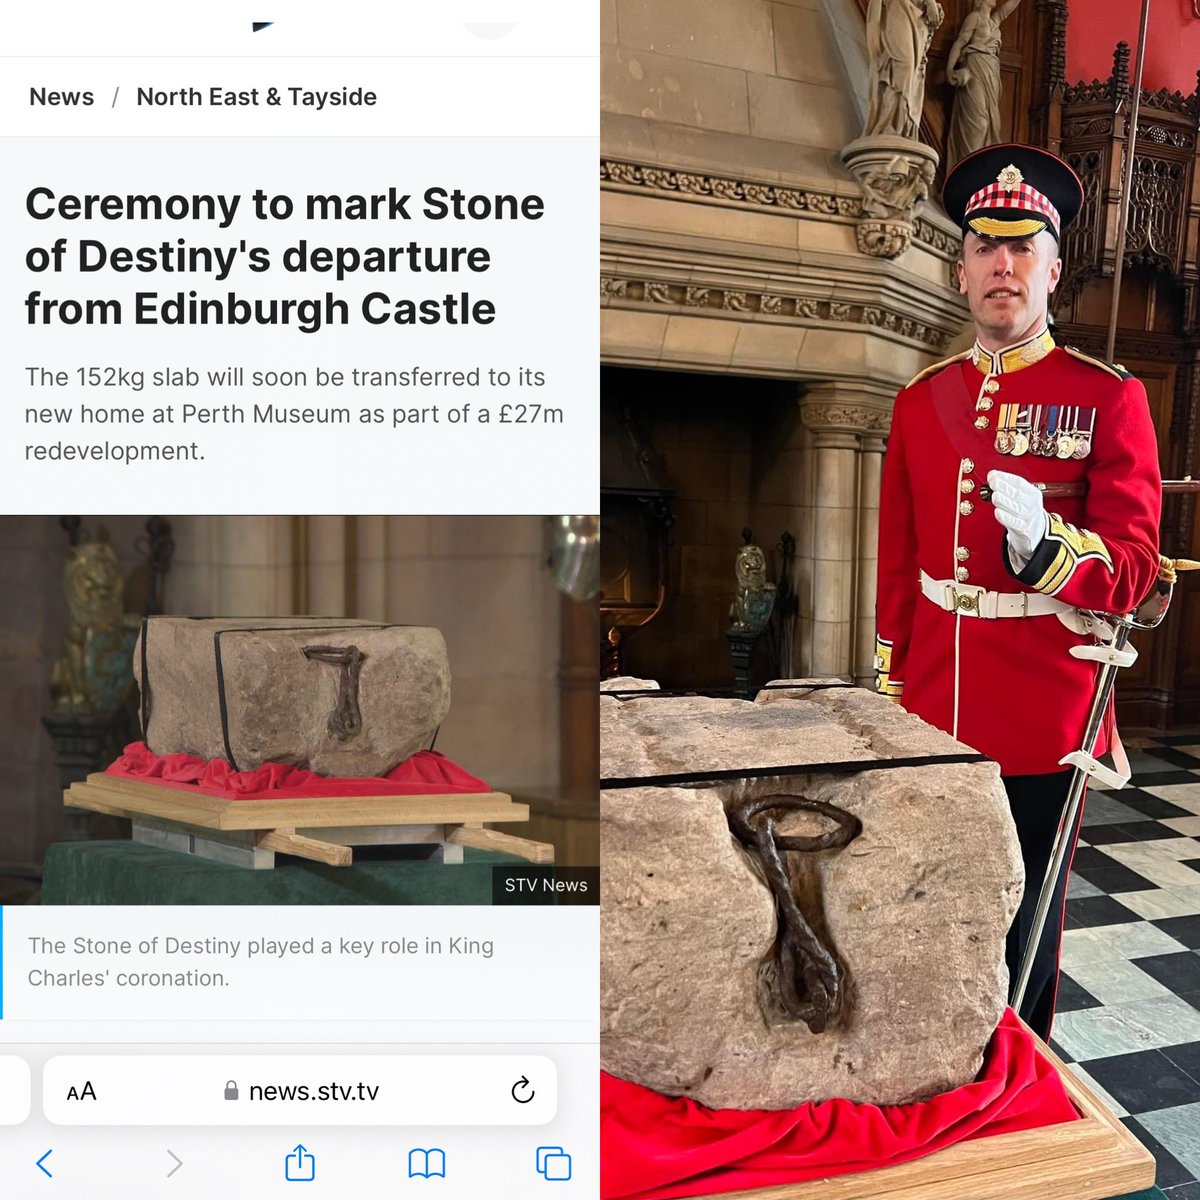 Well I can honestly say, this historic item is pretty special to me. Having seen it on display, and paraded it twice, I will visit this piece of history when it returns back home to Perth and its new home. Best of luck everyone involved in the plan. @STVNews #stoneofdestiny